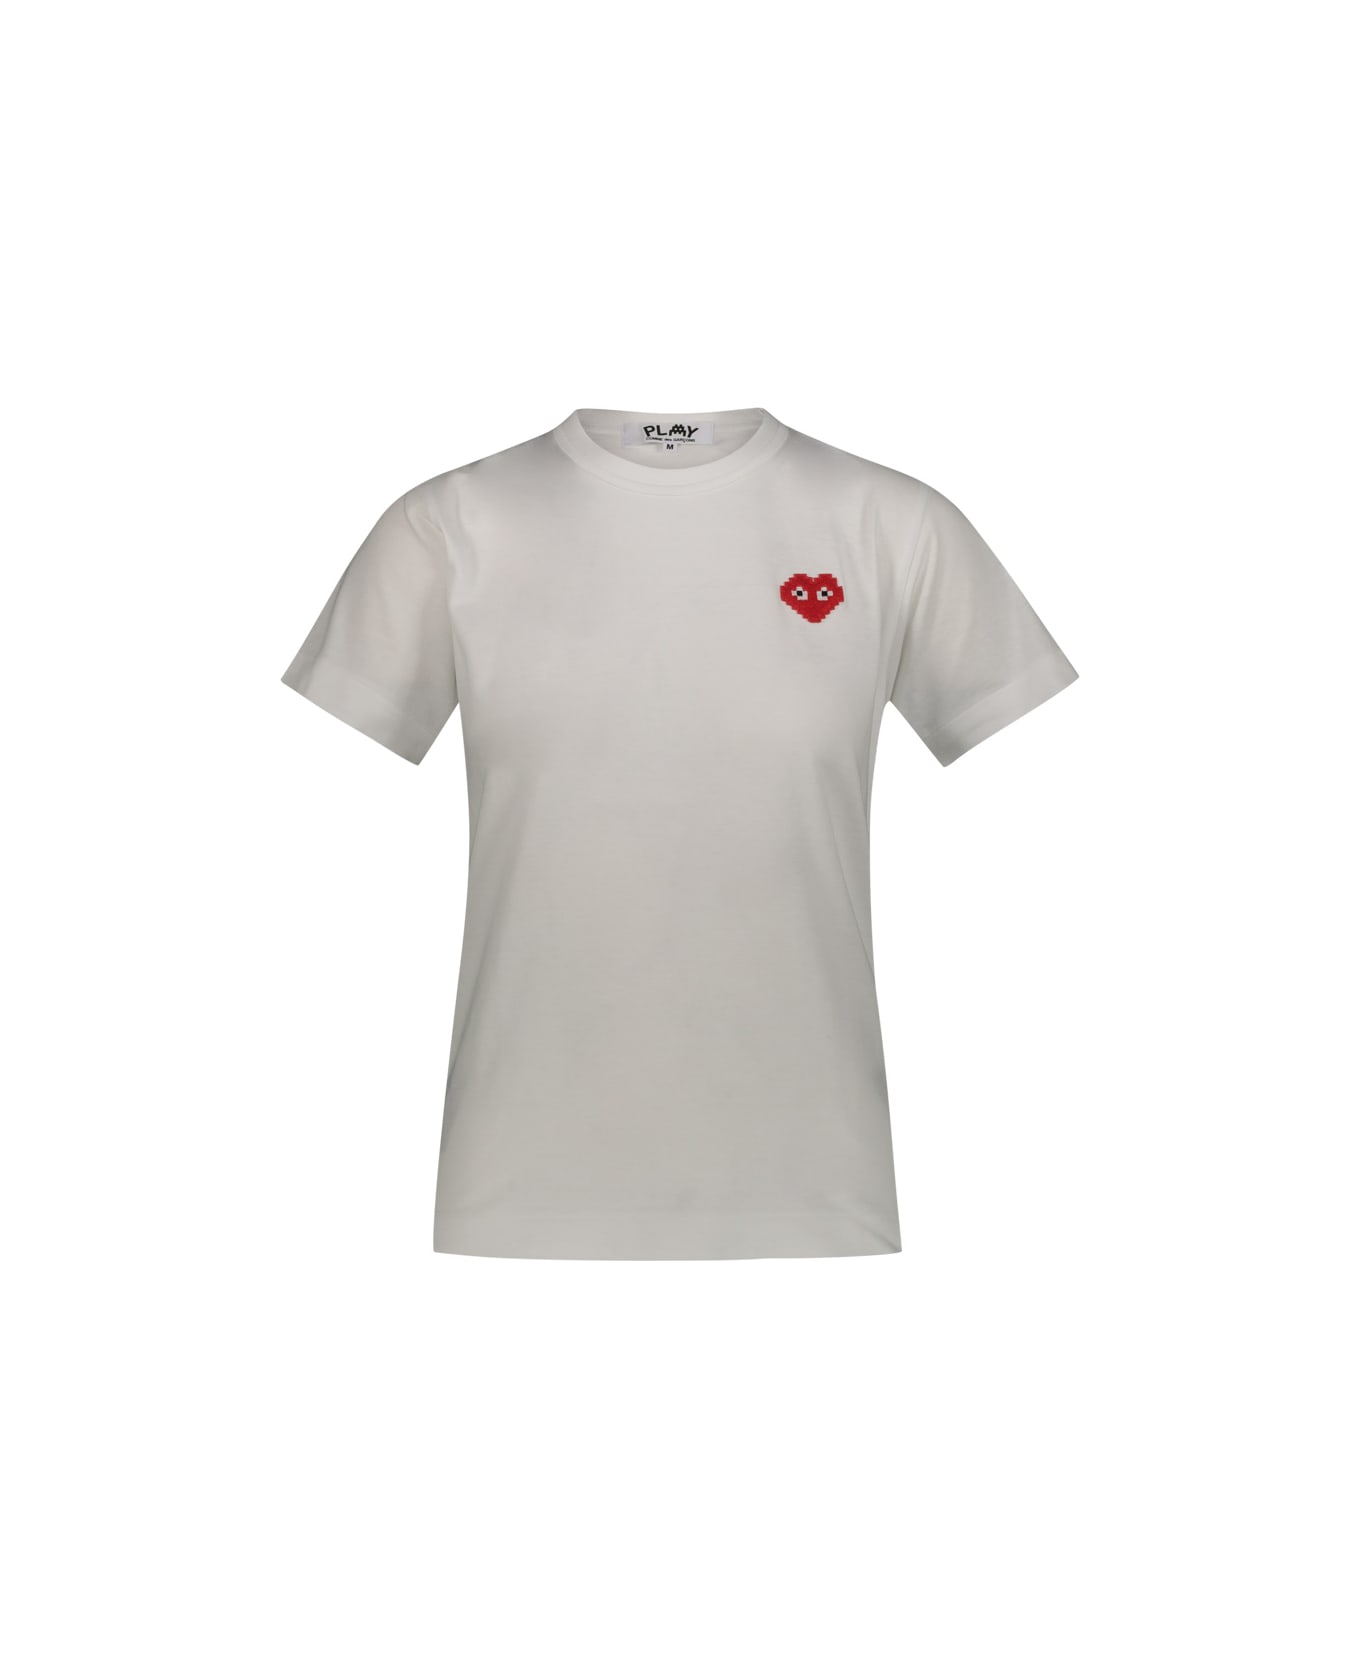 Comme des Garçons Play T-shirt With Red Pixelated Heart - White